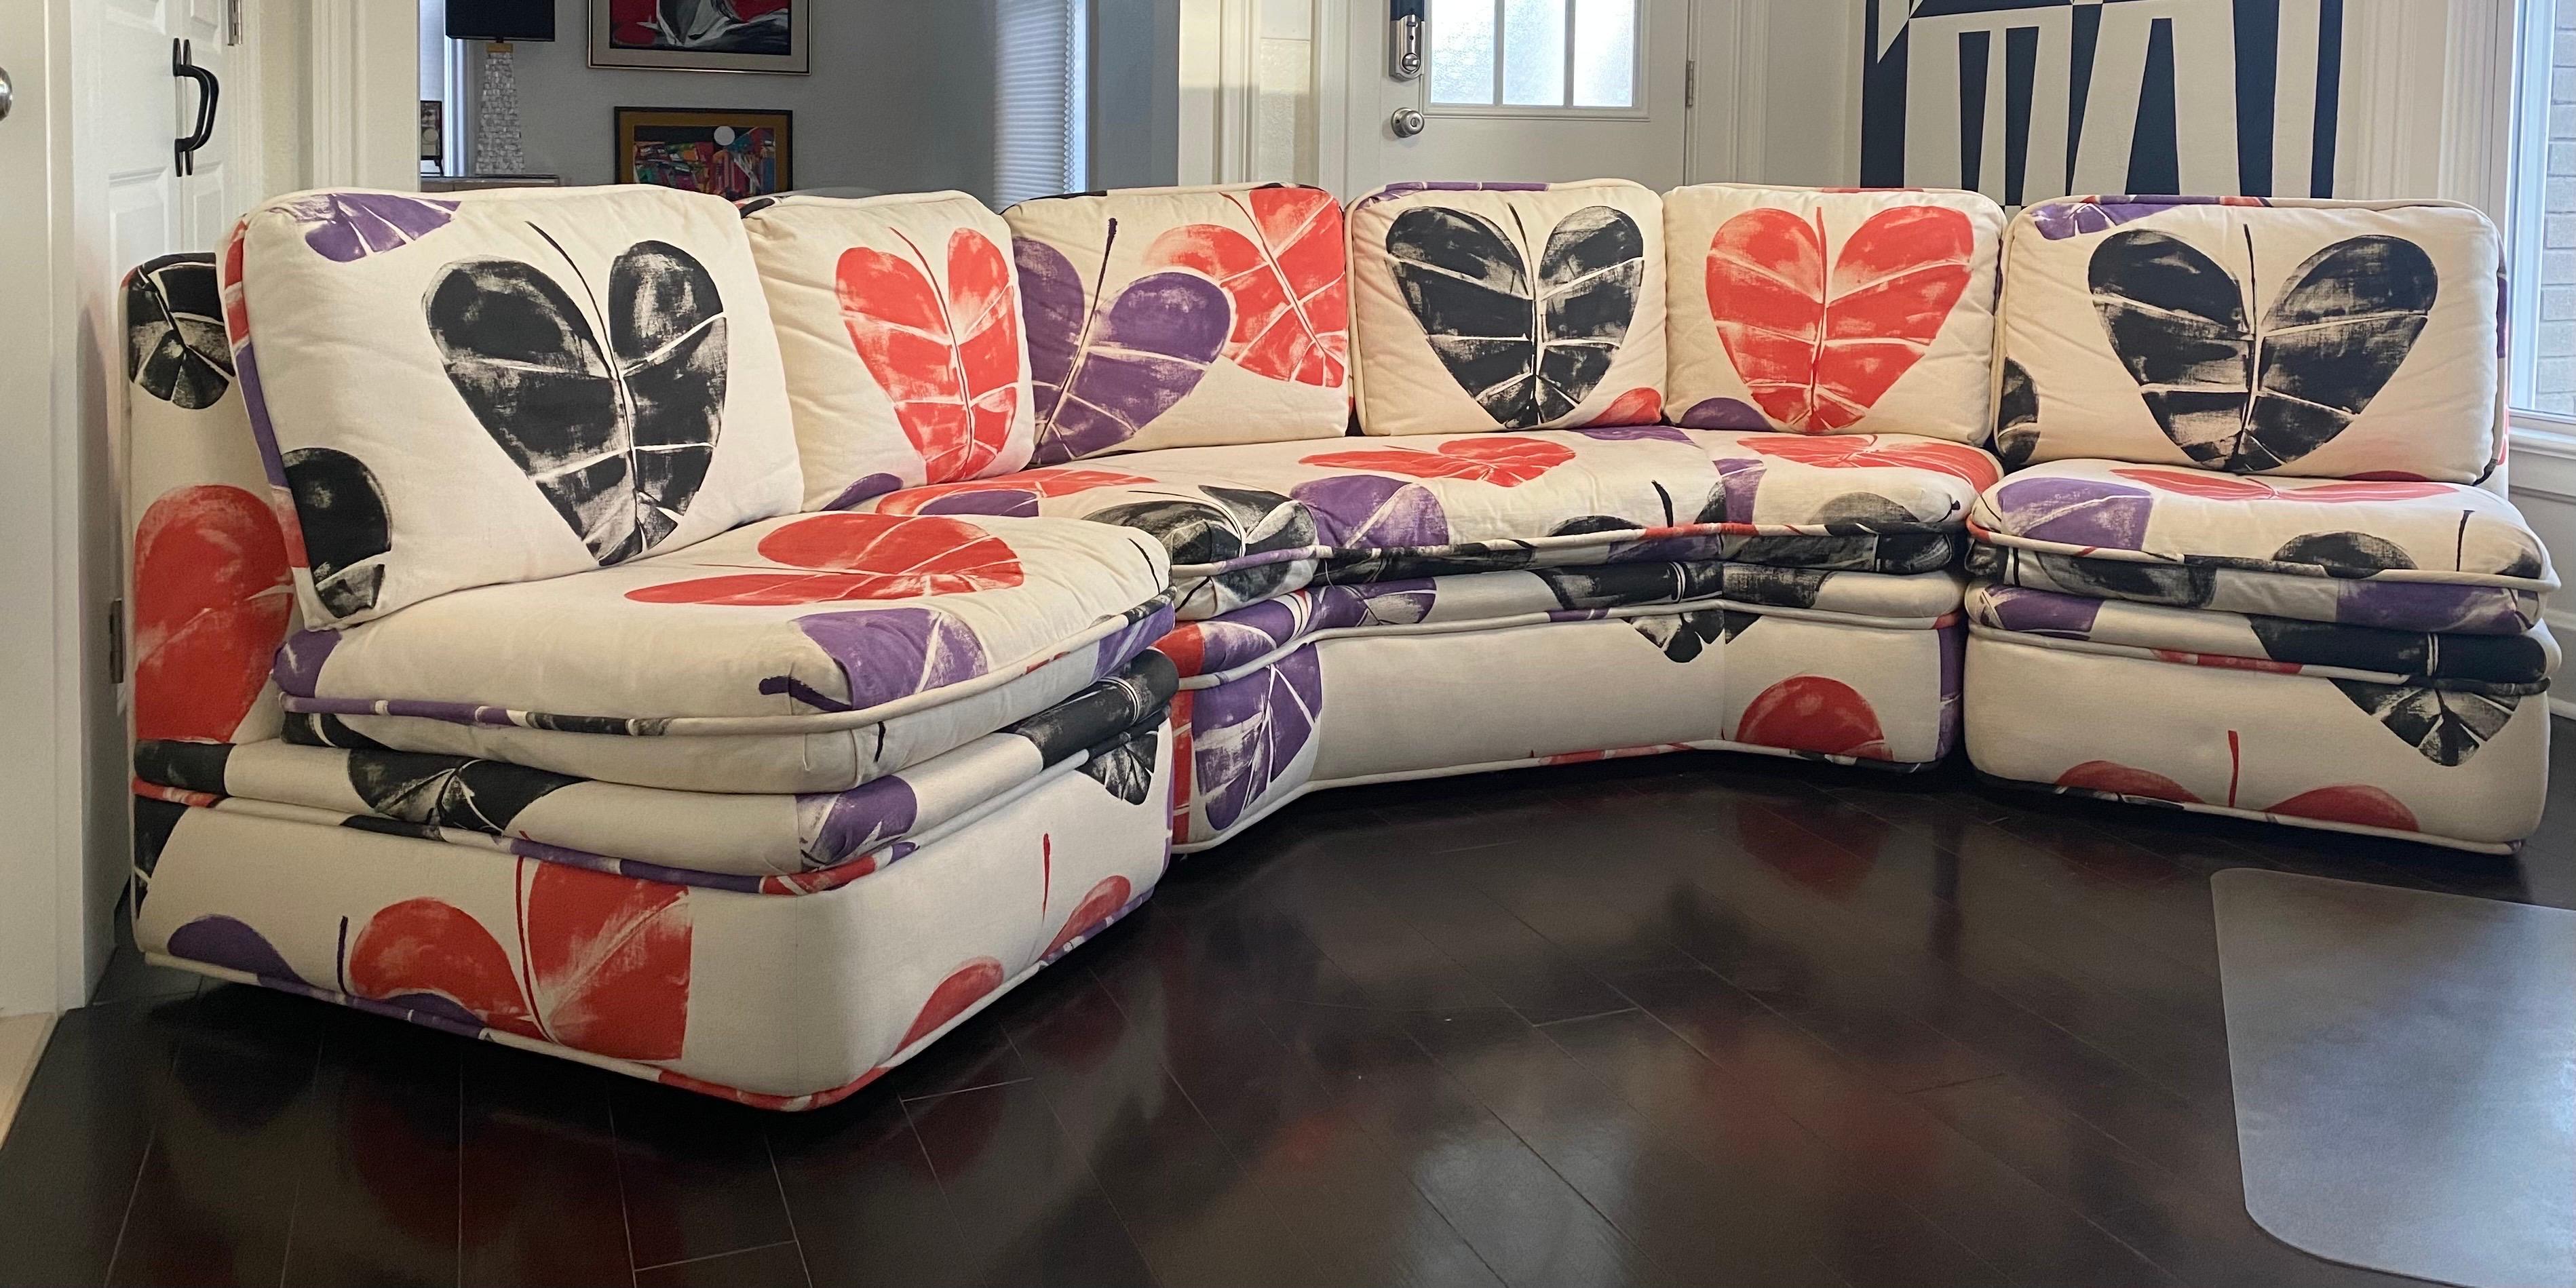 We are very pleased to offer a beautiful, whimsical sofa by Baker Furniture, circa 1981. Showcasing its original playful, linen fabric, this piece offers a visual conversation of beautiful, heart-shaped leaves in red, black and purple colors. Each